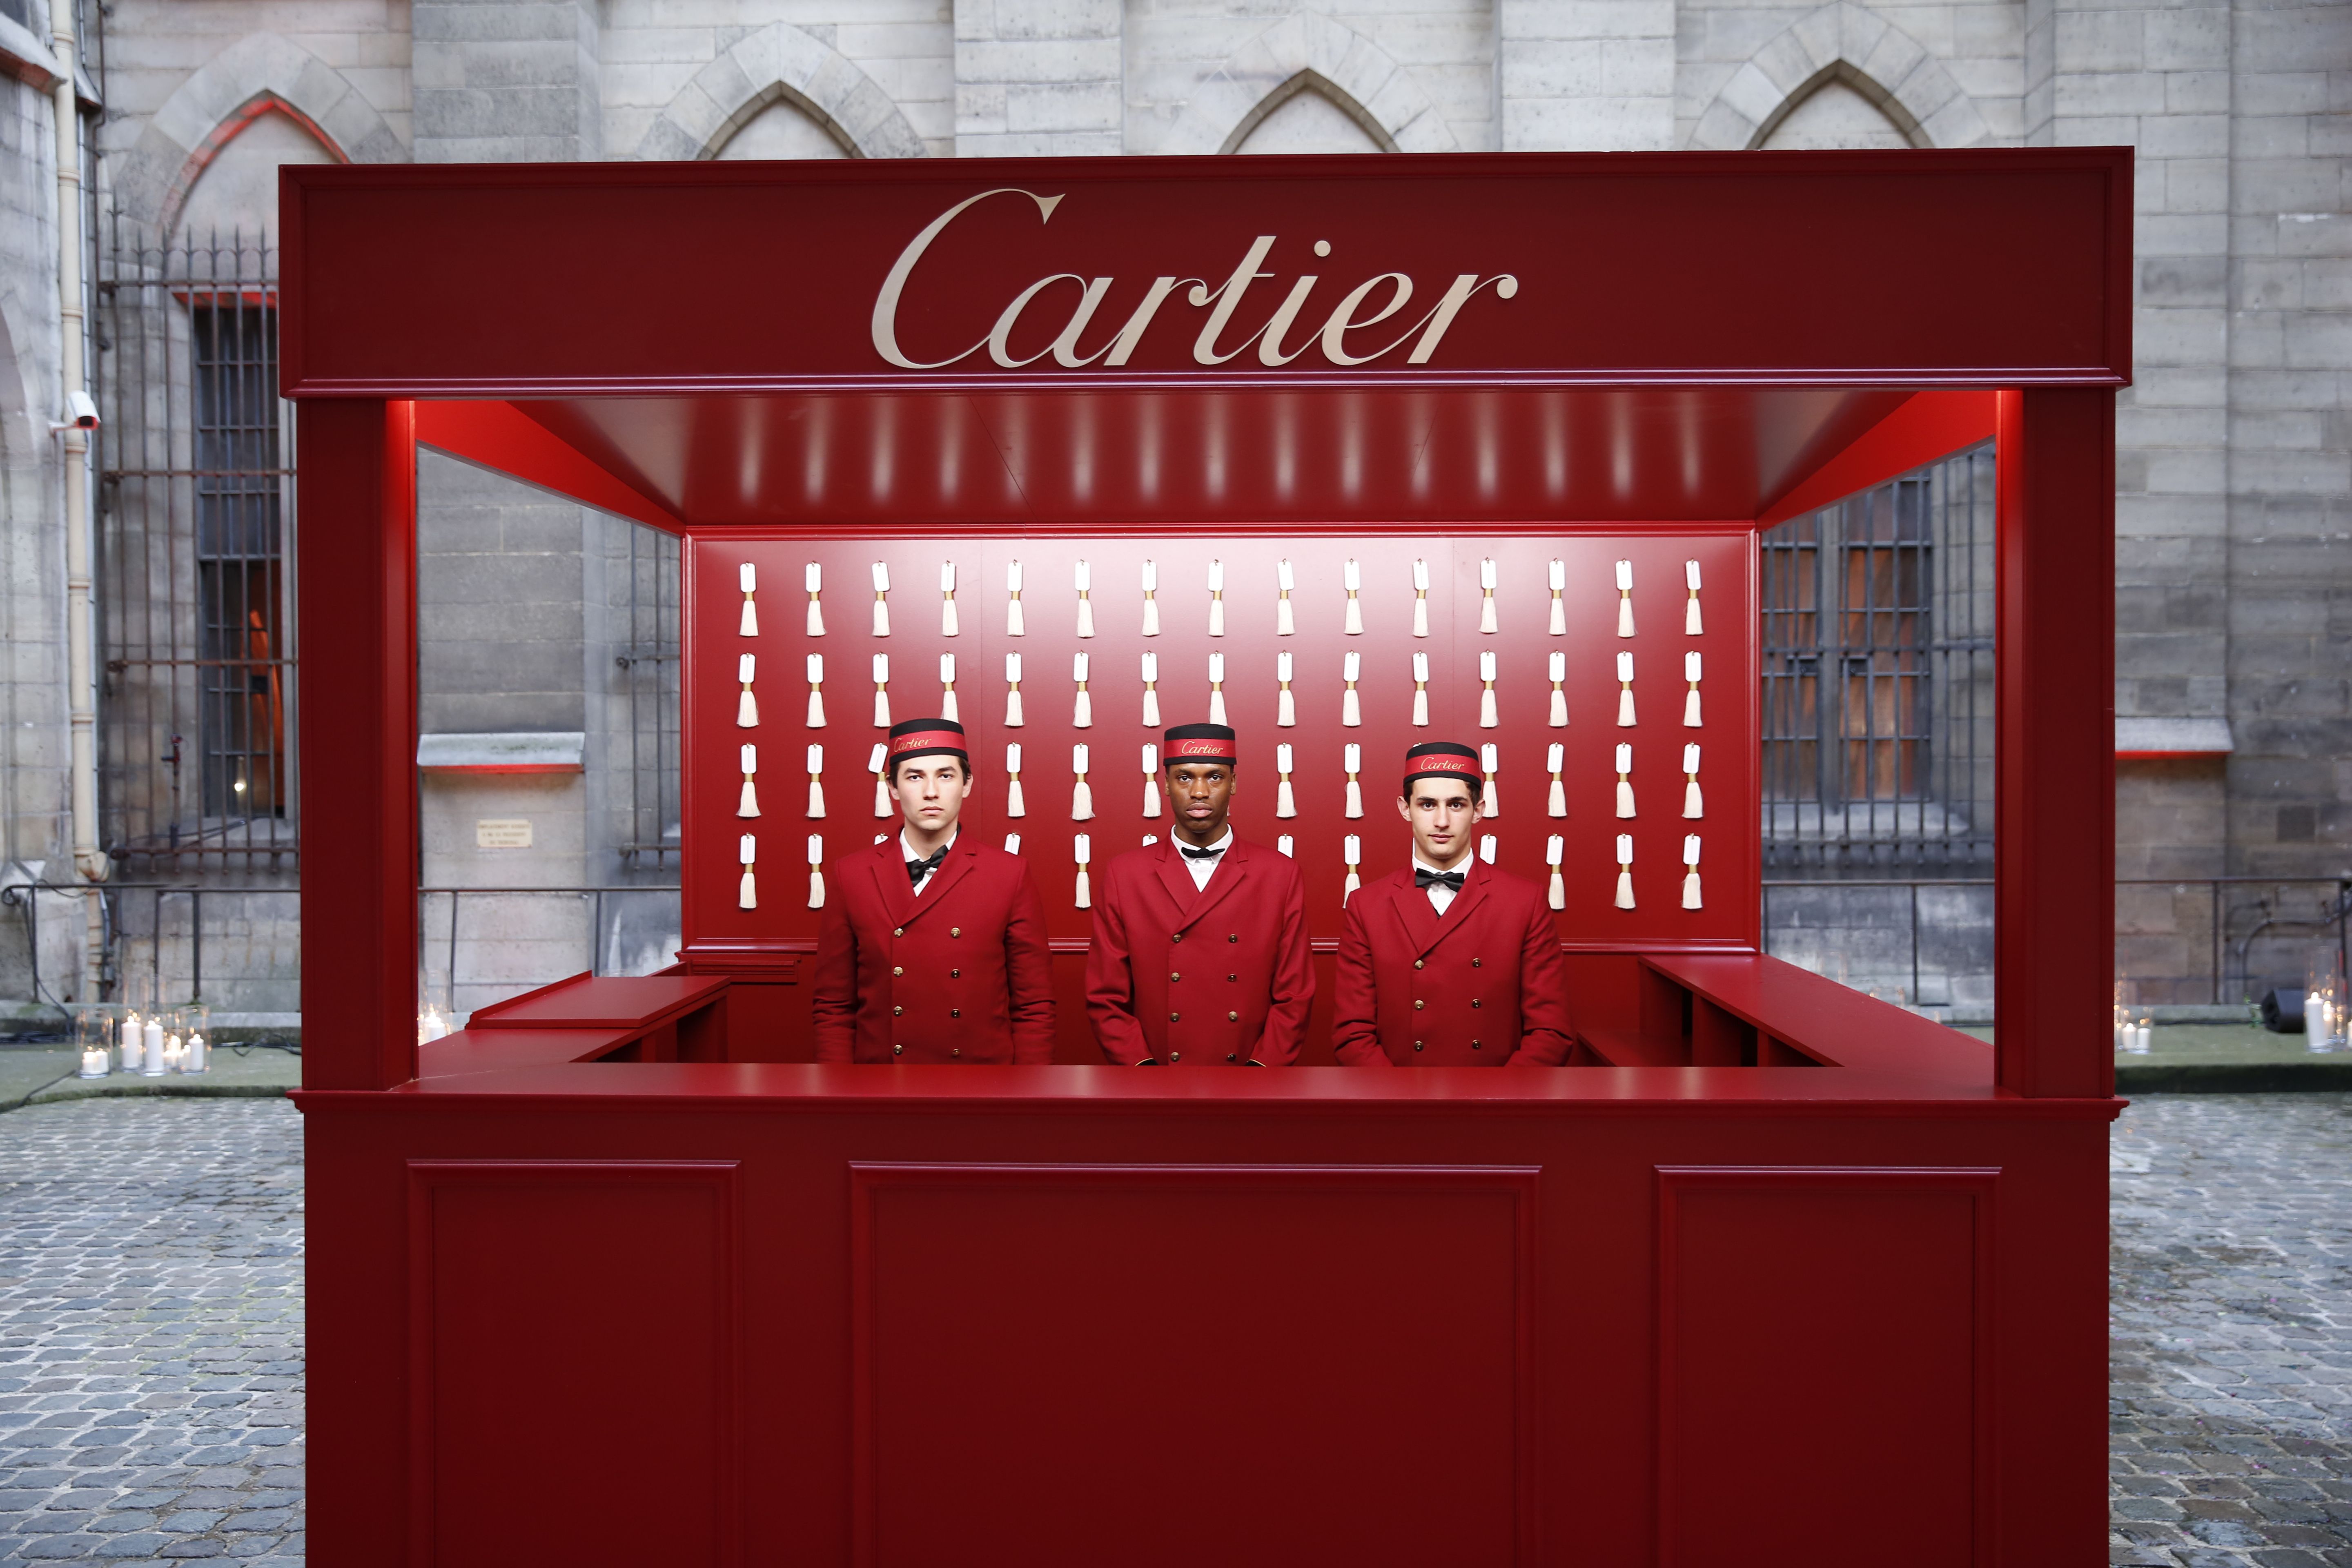 How Clash de Cartier is shaking up the brand’s signature jewellery collection